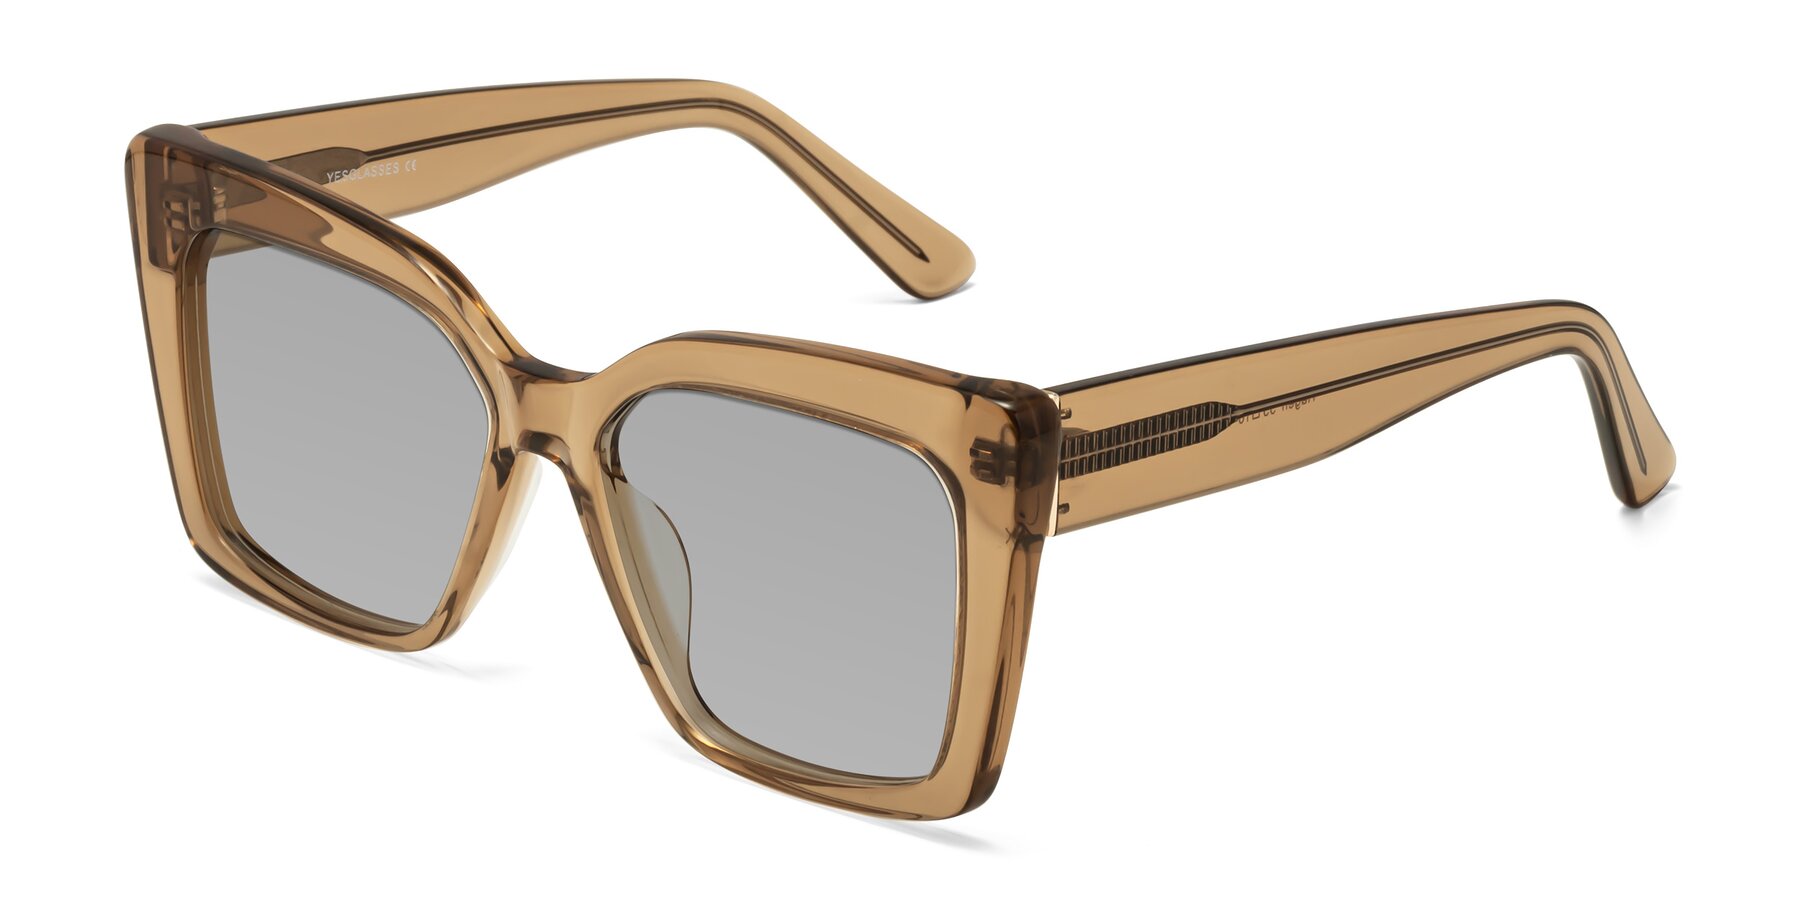 Angle of Hagen in Translucent Brown with Light Gray Tinted Lenses